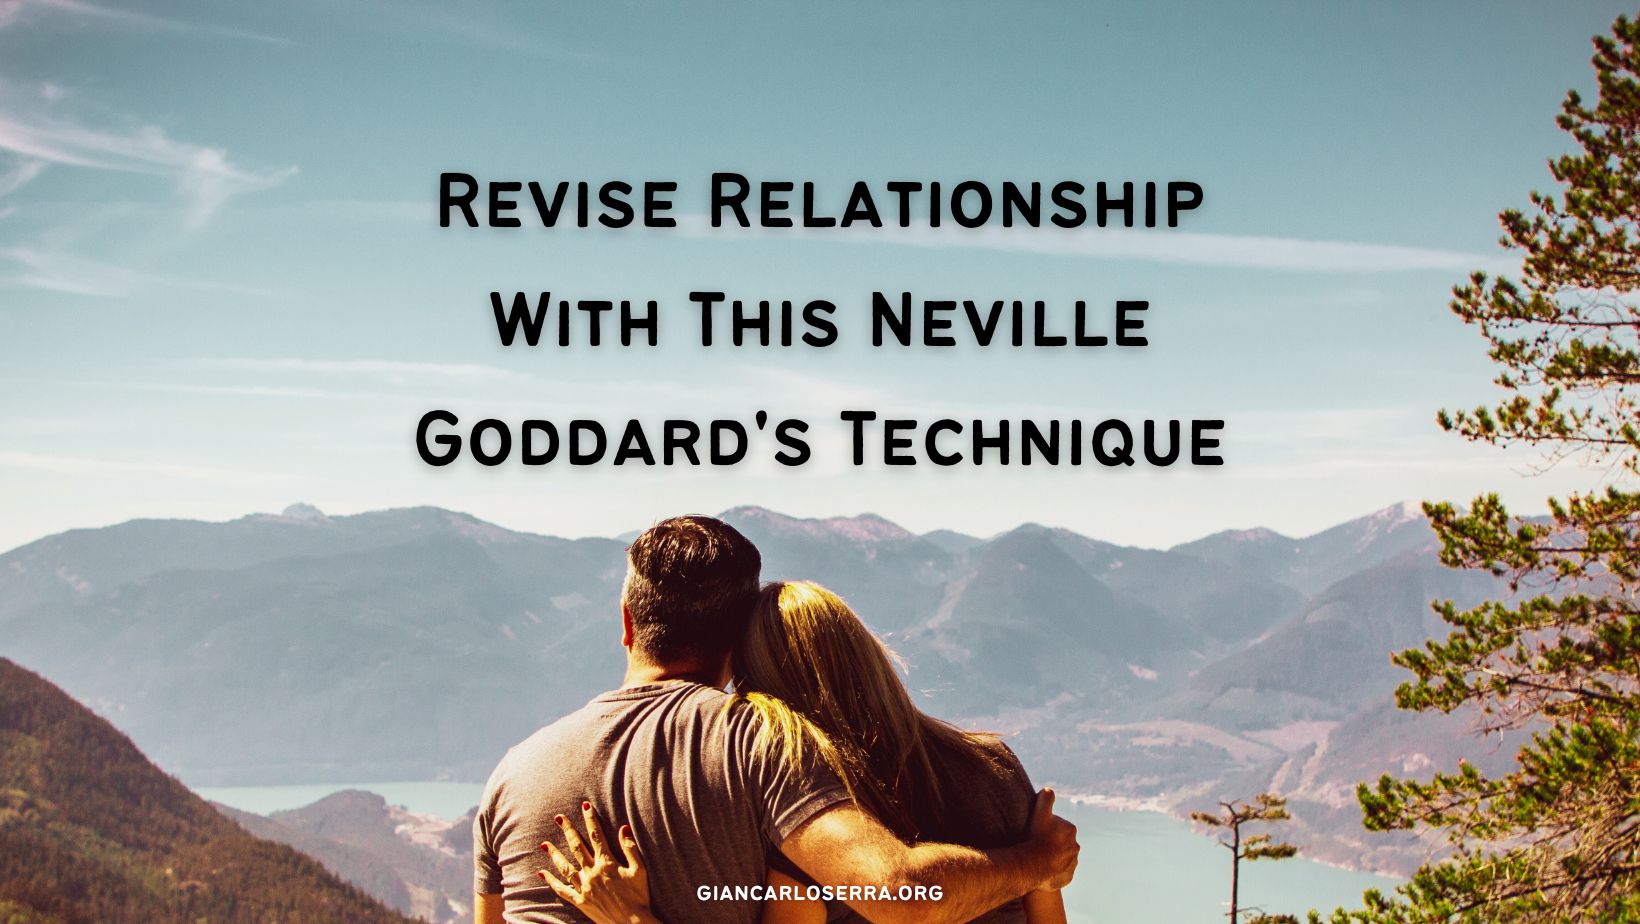 Revise Relationship With This Neville Goddard's Technique